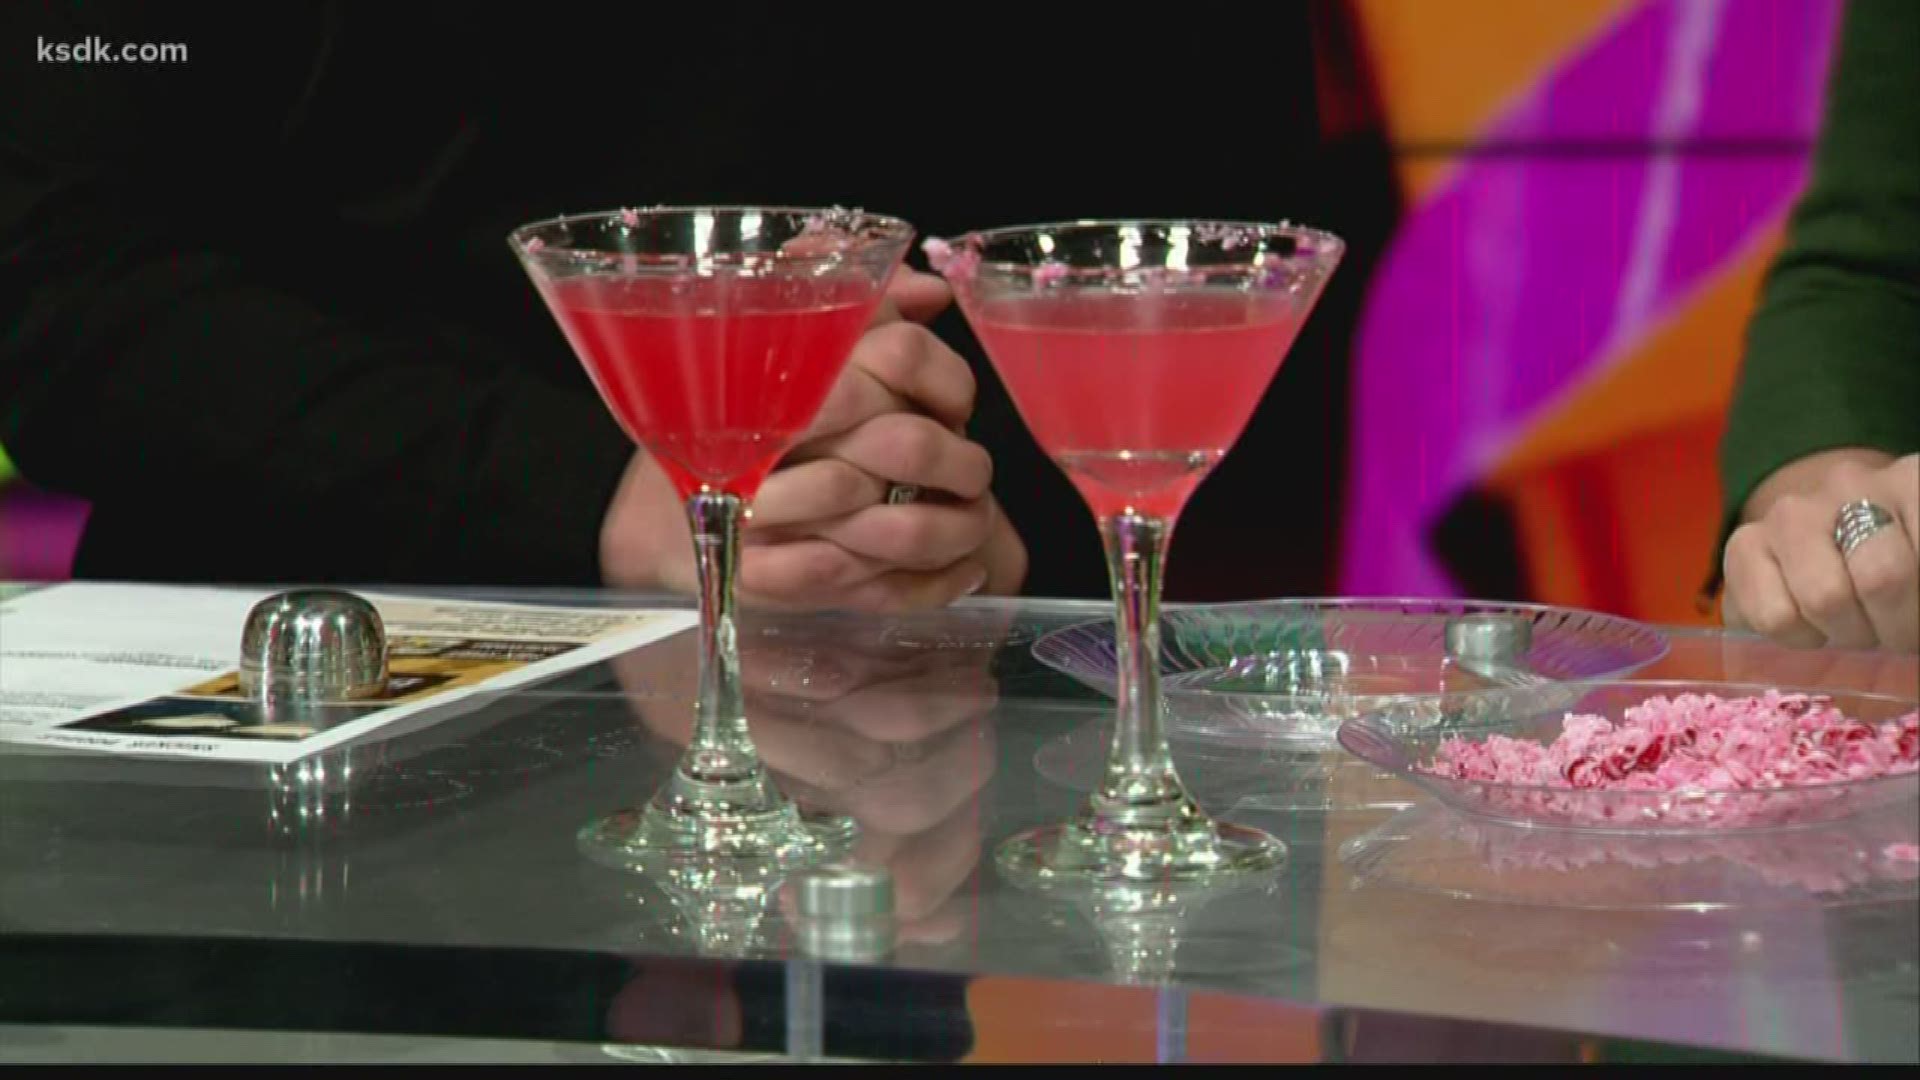 Check out how to make a festive Candy Cane Martini.